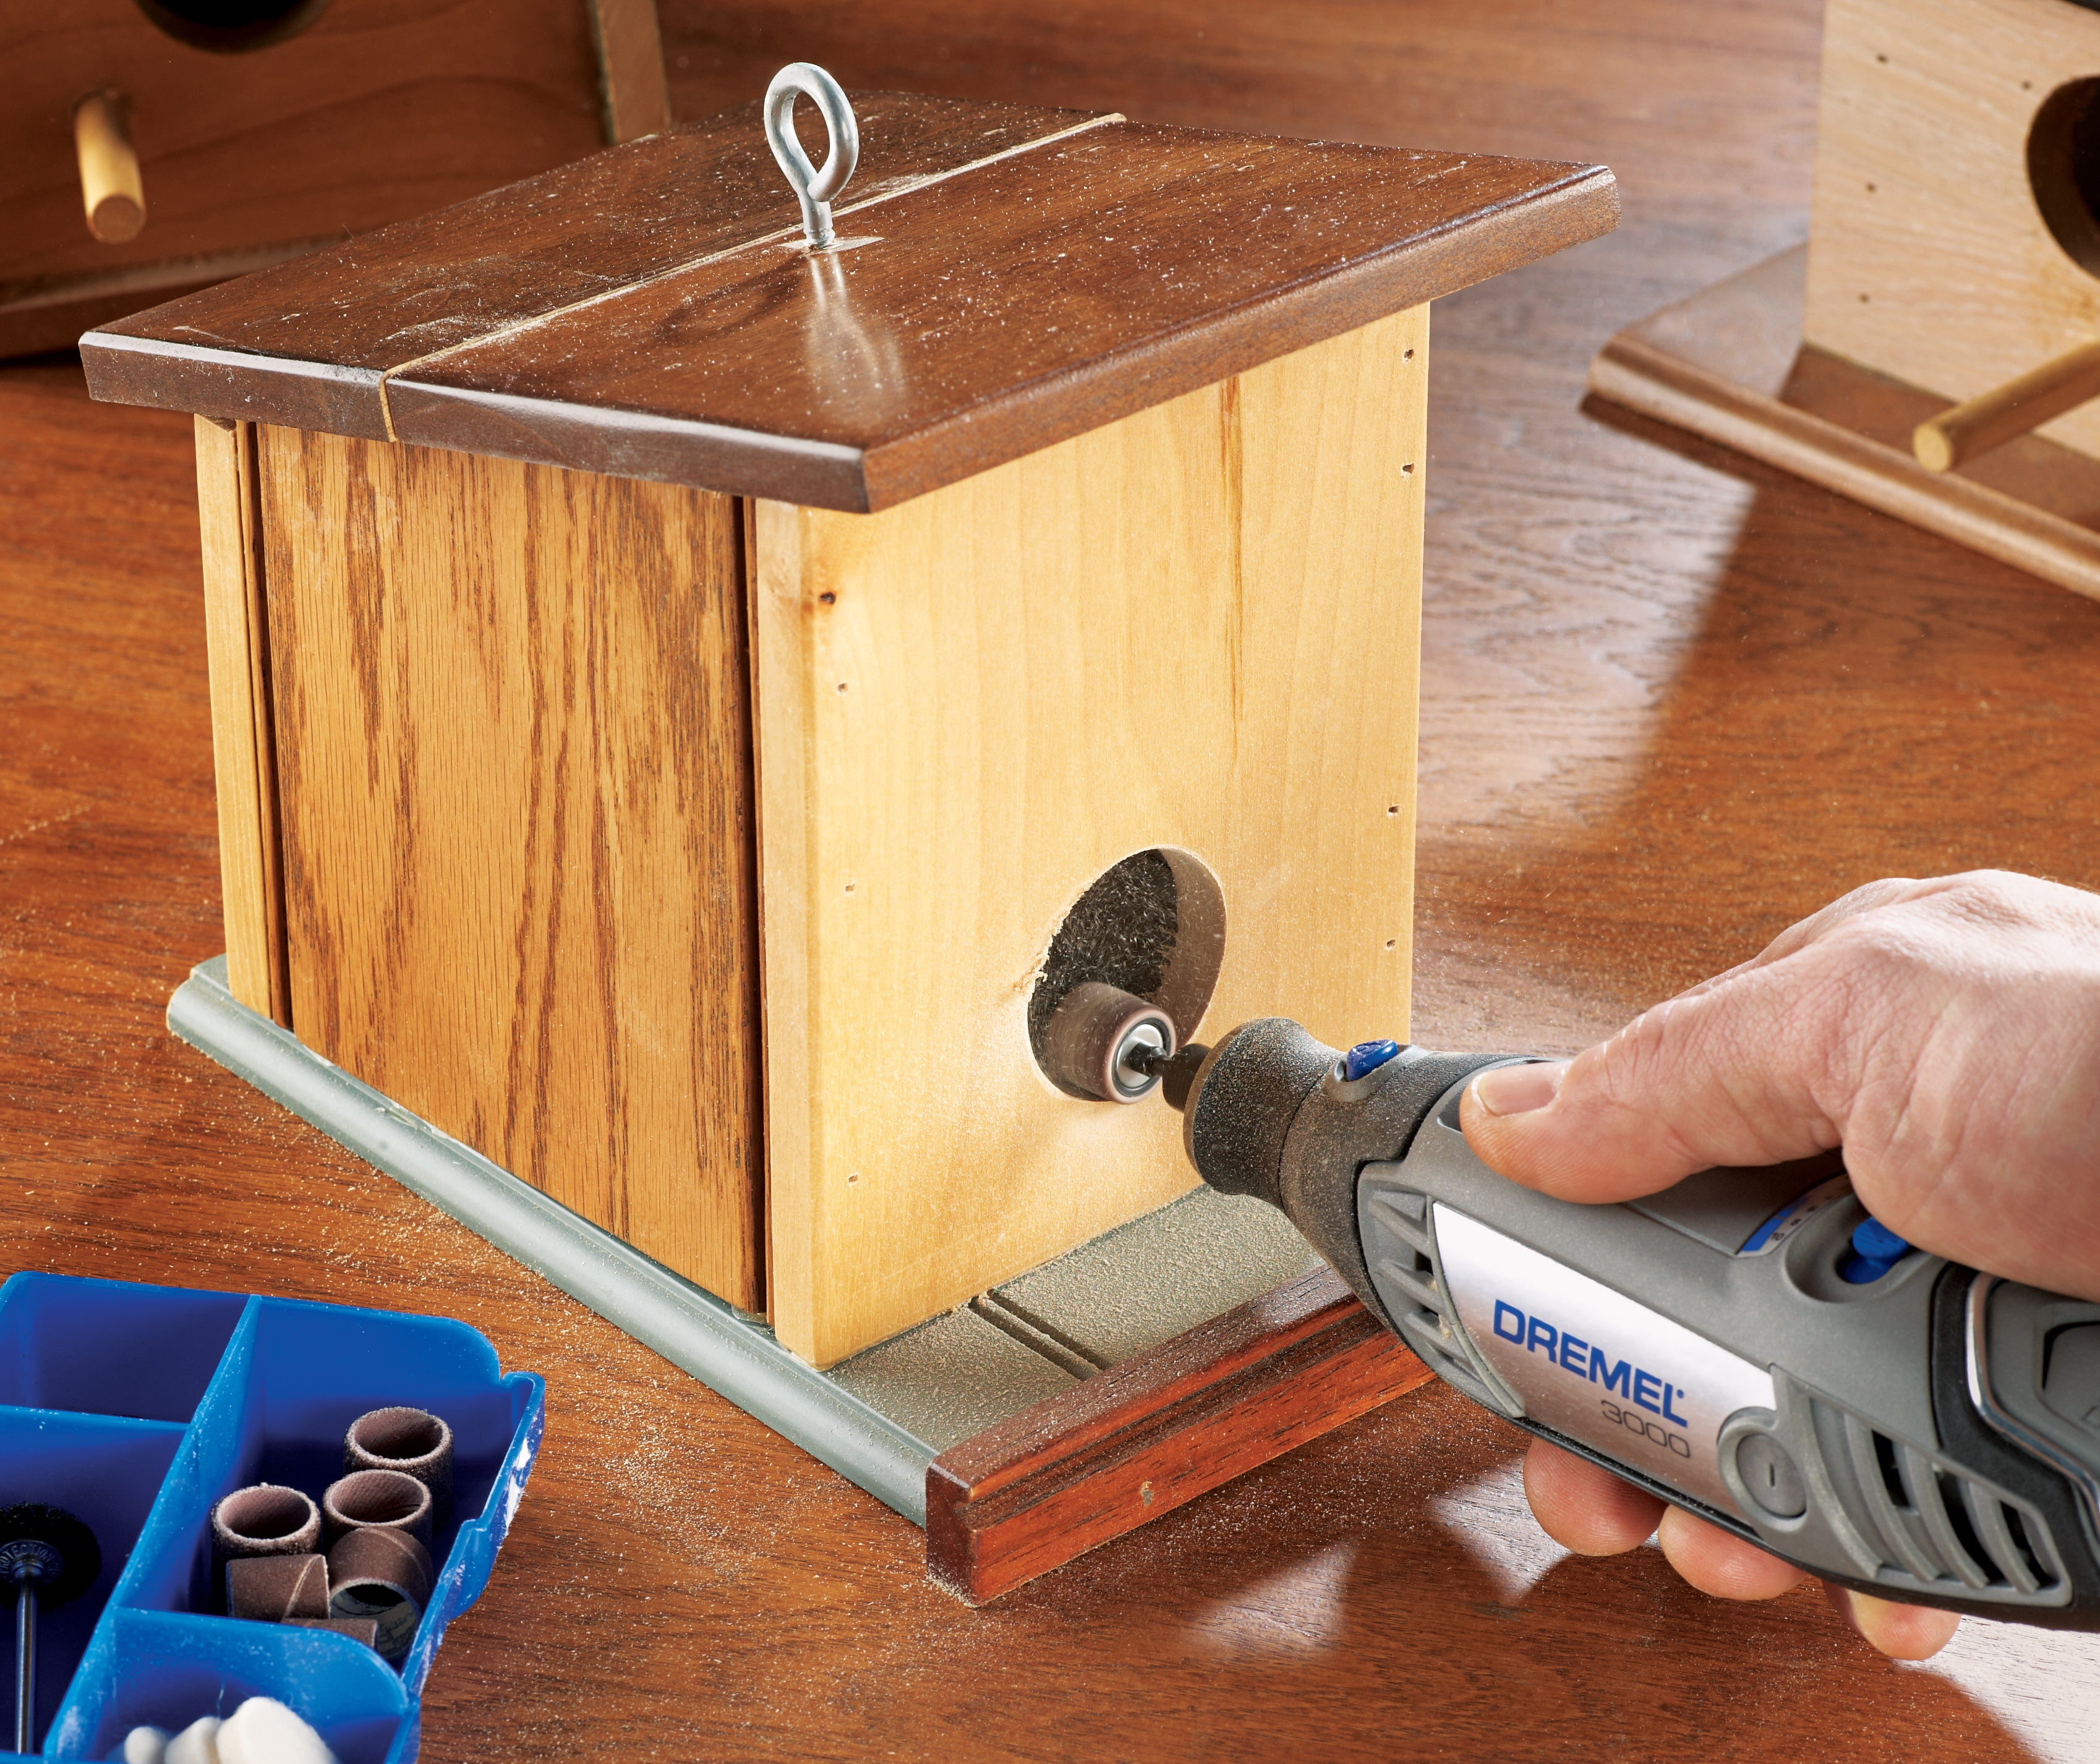 Dremel 3000-2/28 Variable Speed Rotary Tool Kit- 1 Attachments & 28  Accessories- Grinder, Sander, Polisher, Router, and Engraver- Perfect for  Routing, Metal Cutting, Wood Carving, and Polishing - Power Rotary Tools 